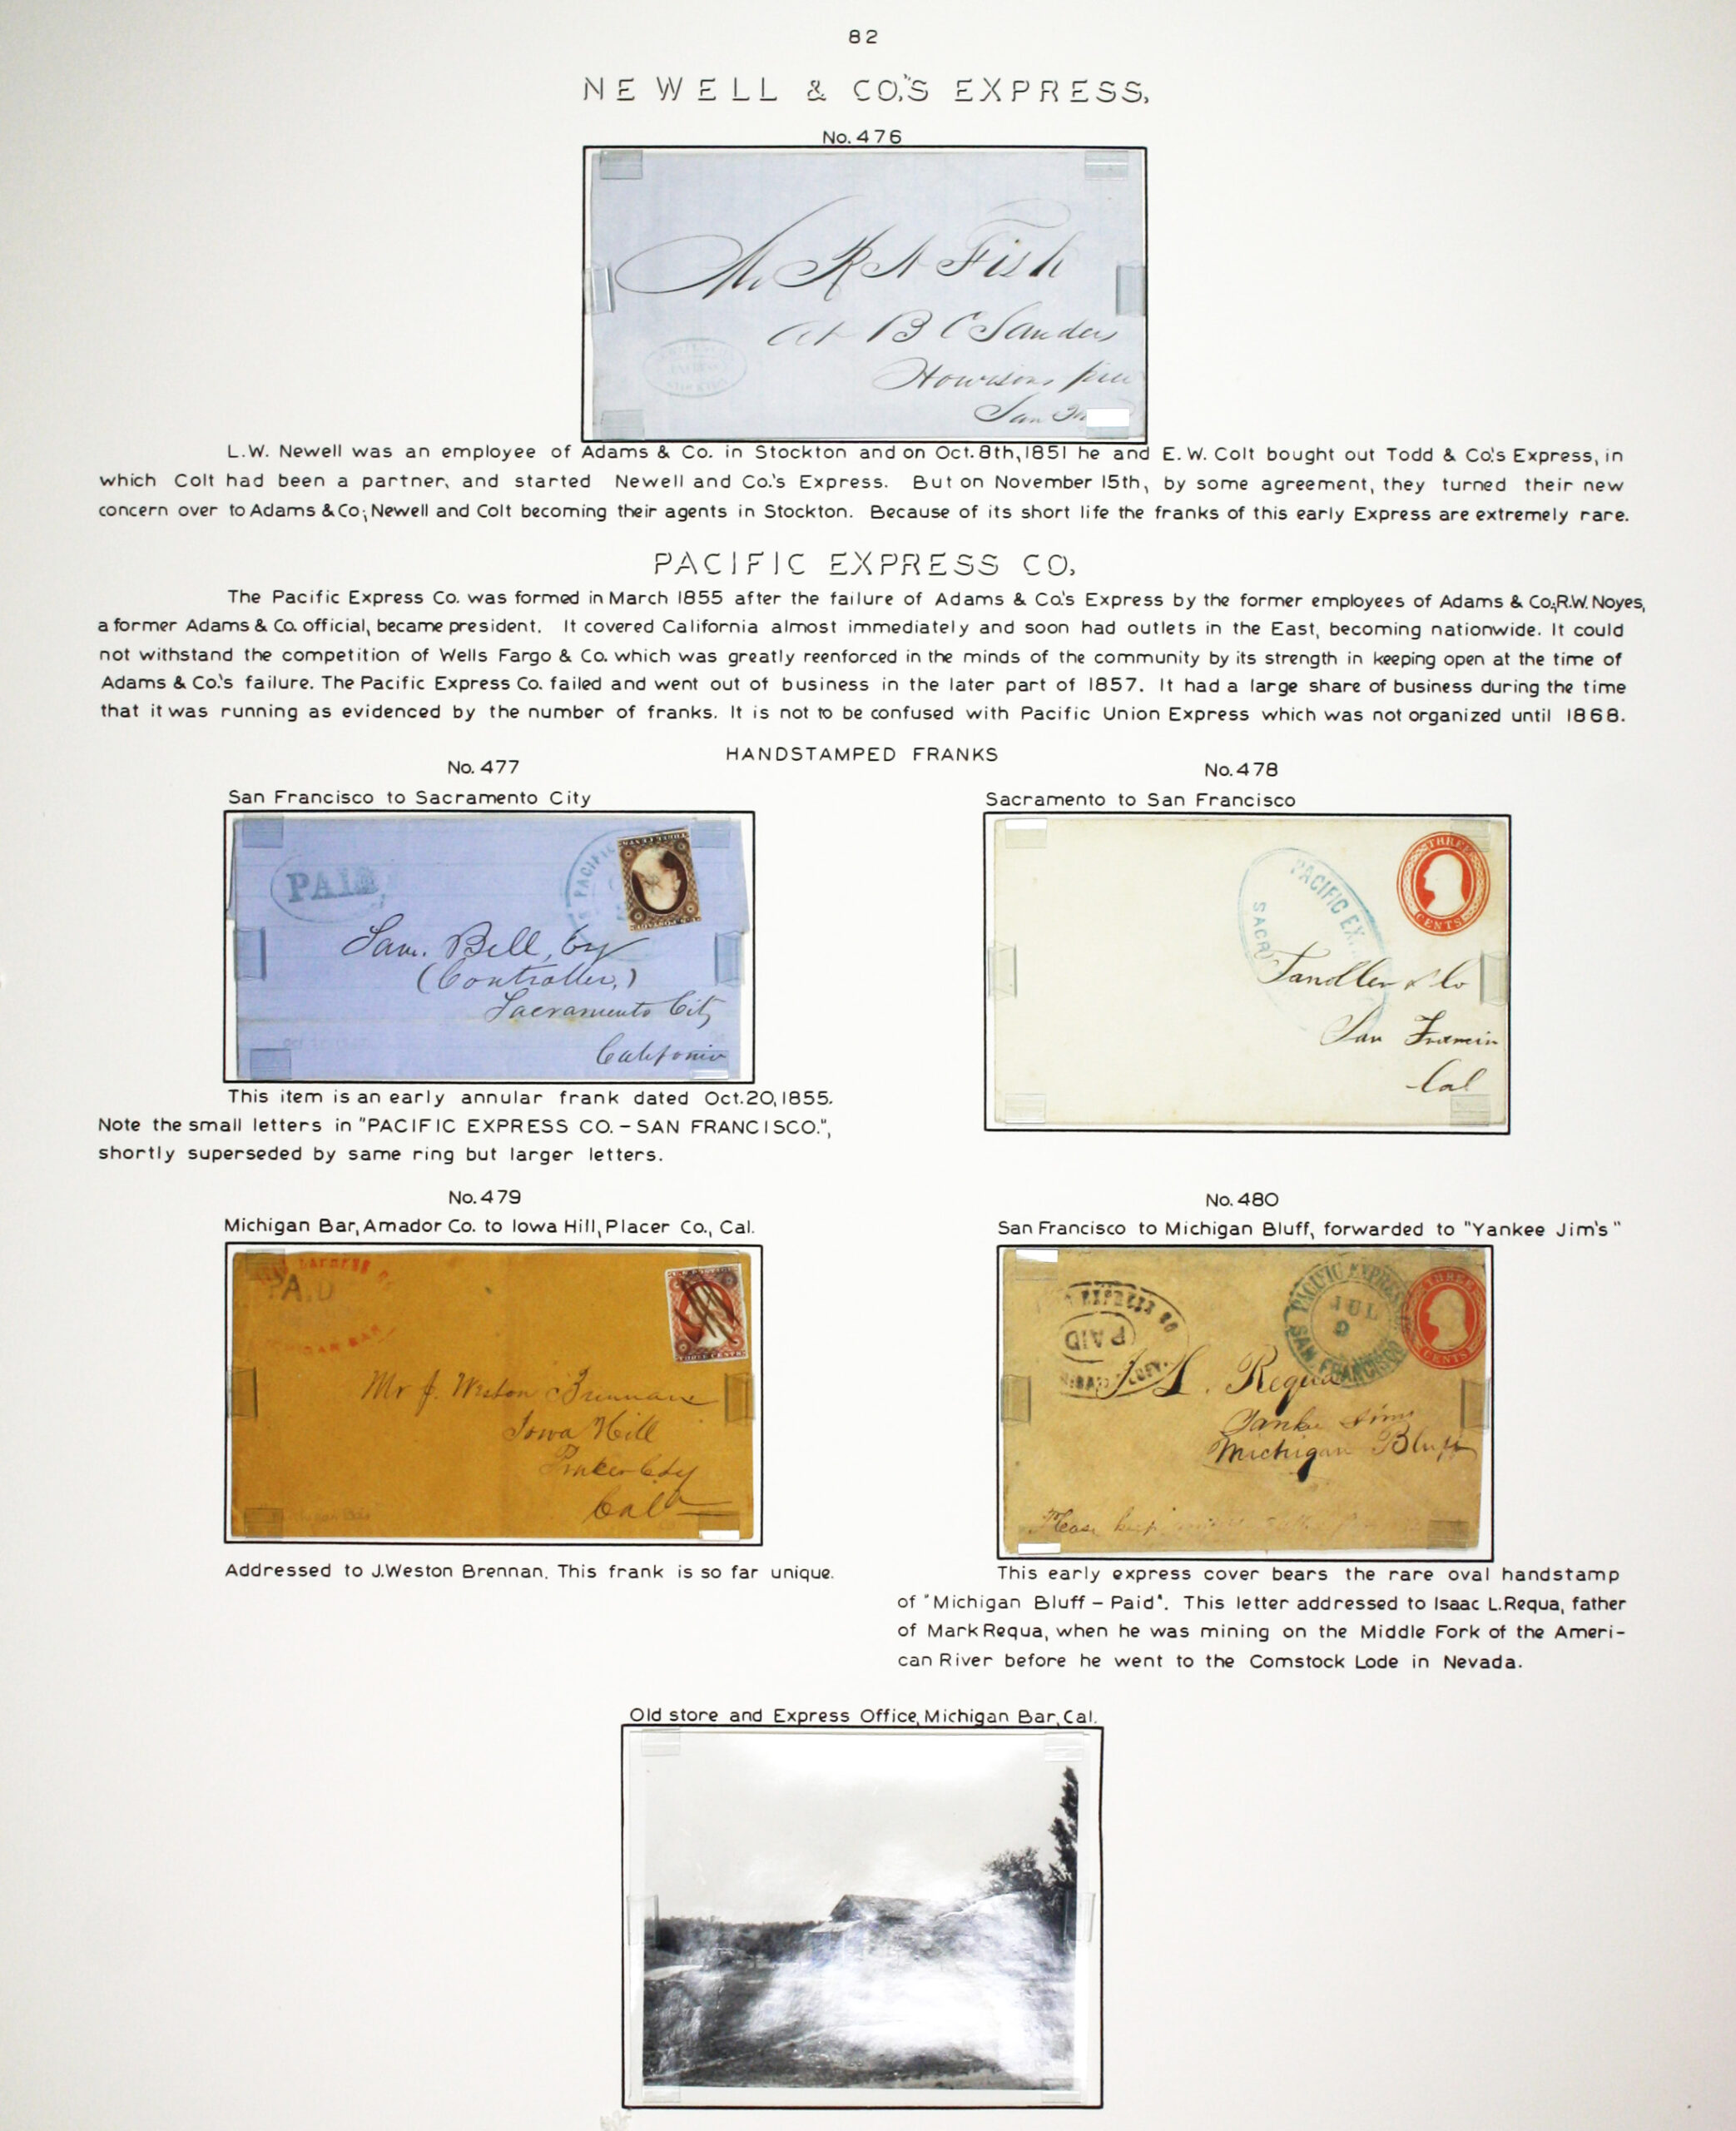 Historic exhibit Panel #82 featuring letter covers and a photograph. Long descriptions are available as page content. Image link will enlarge image.